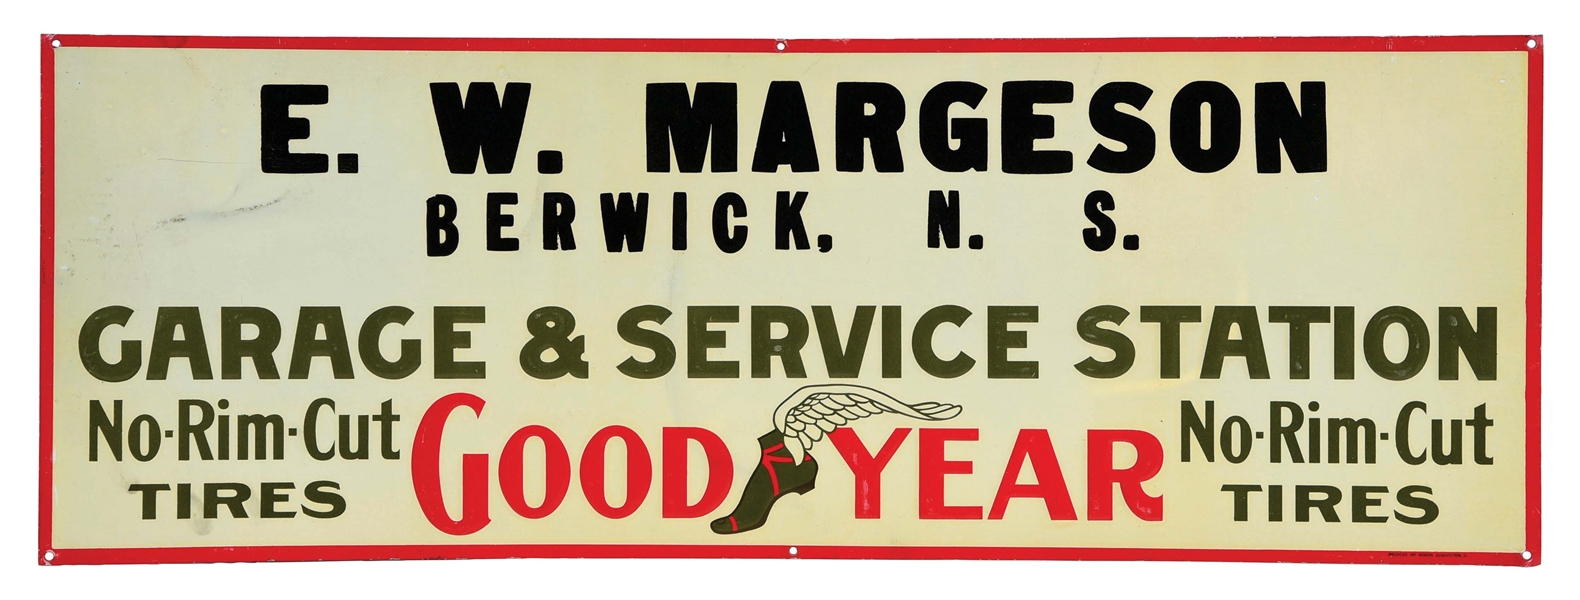 RARE GOODYEAR TIRES GARAGE & SERVICE STATION EMBOSSED TIN SIGN W/ EARLY WINGED FOOT GRAPHIC. 